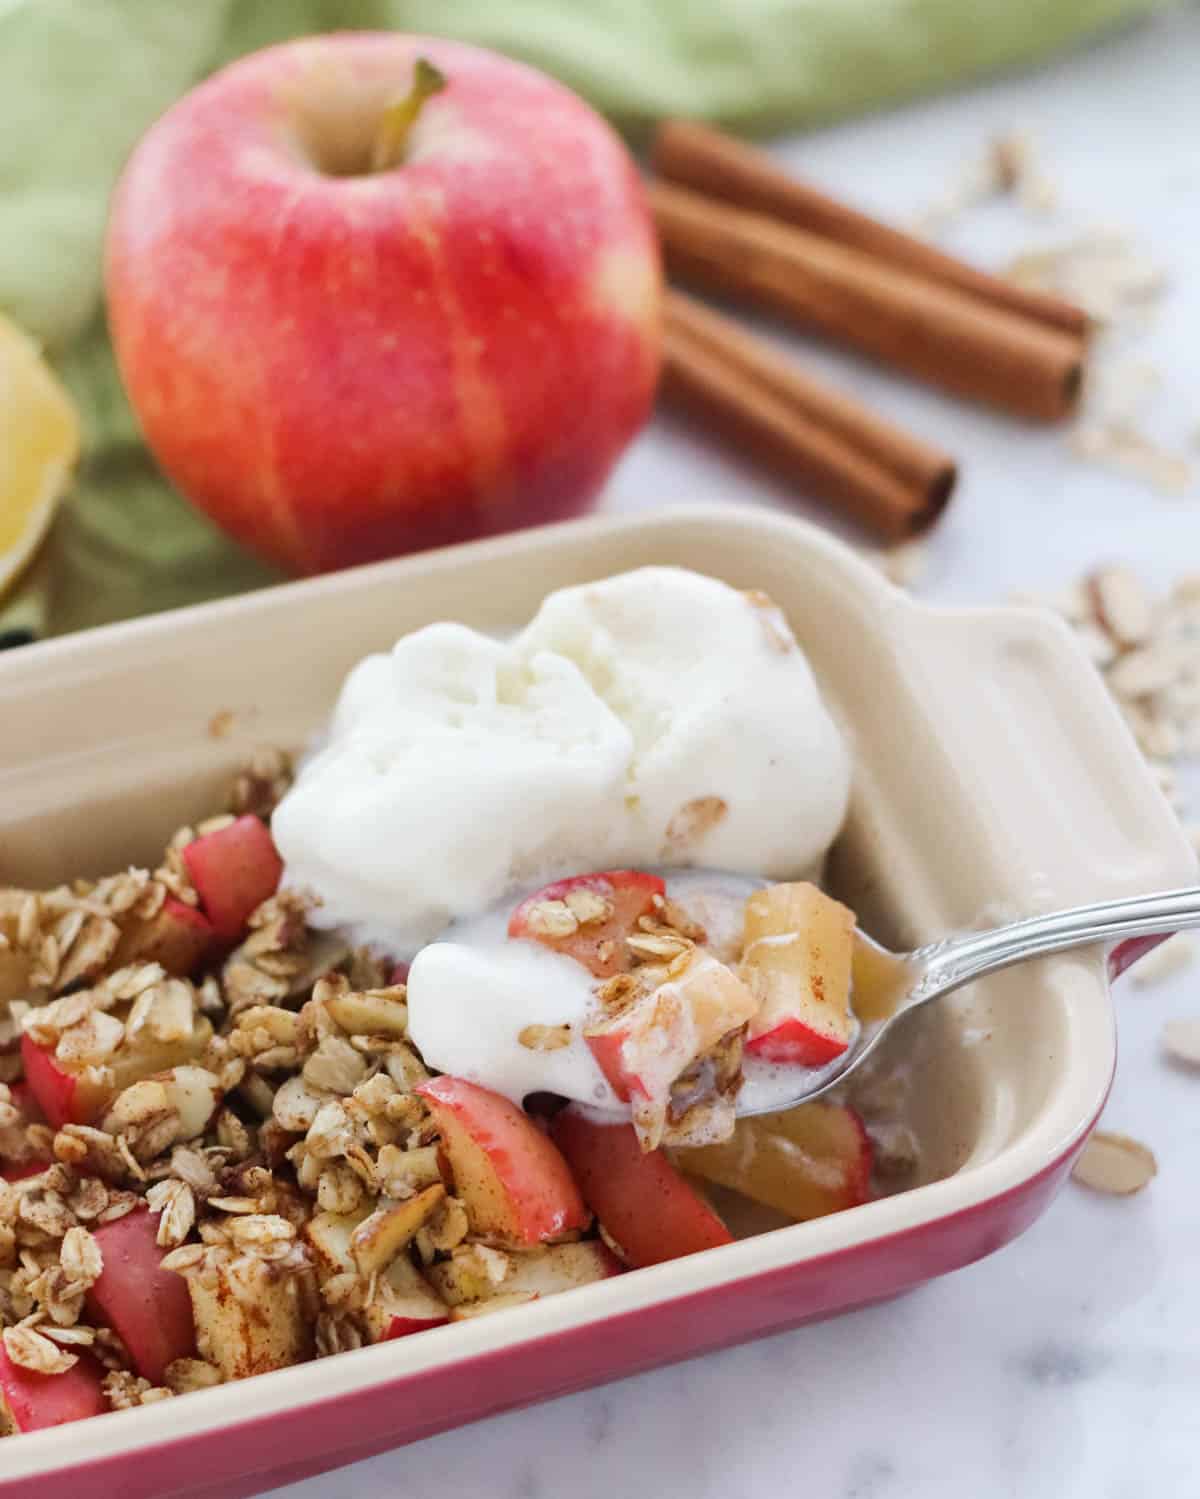 silver spoon scooping out baked apples with ice cream from a small red baking dish with apple and cinnamon sticks in background